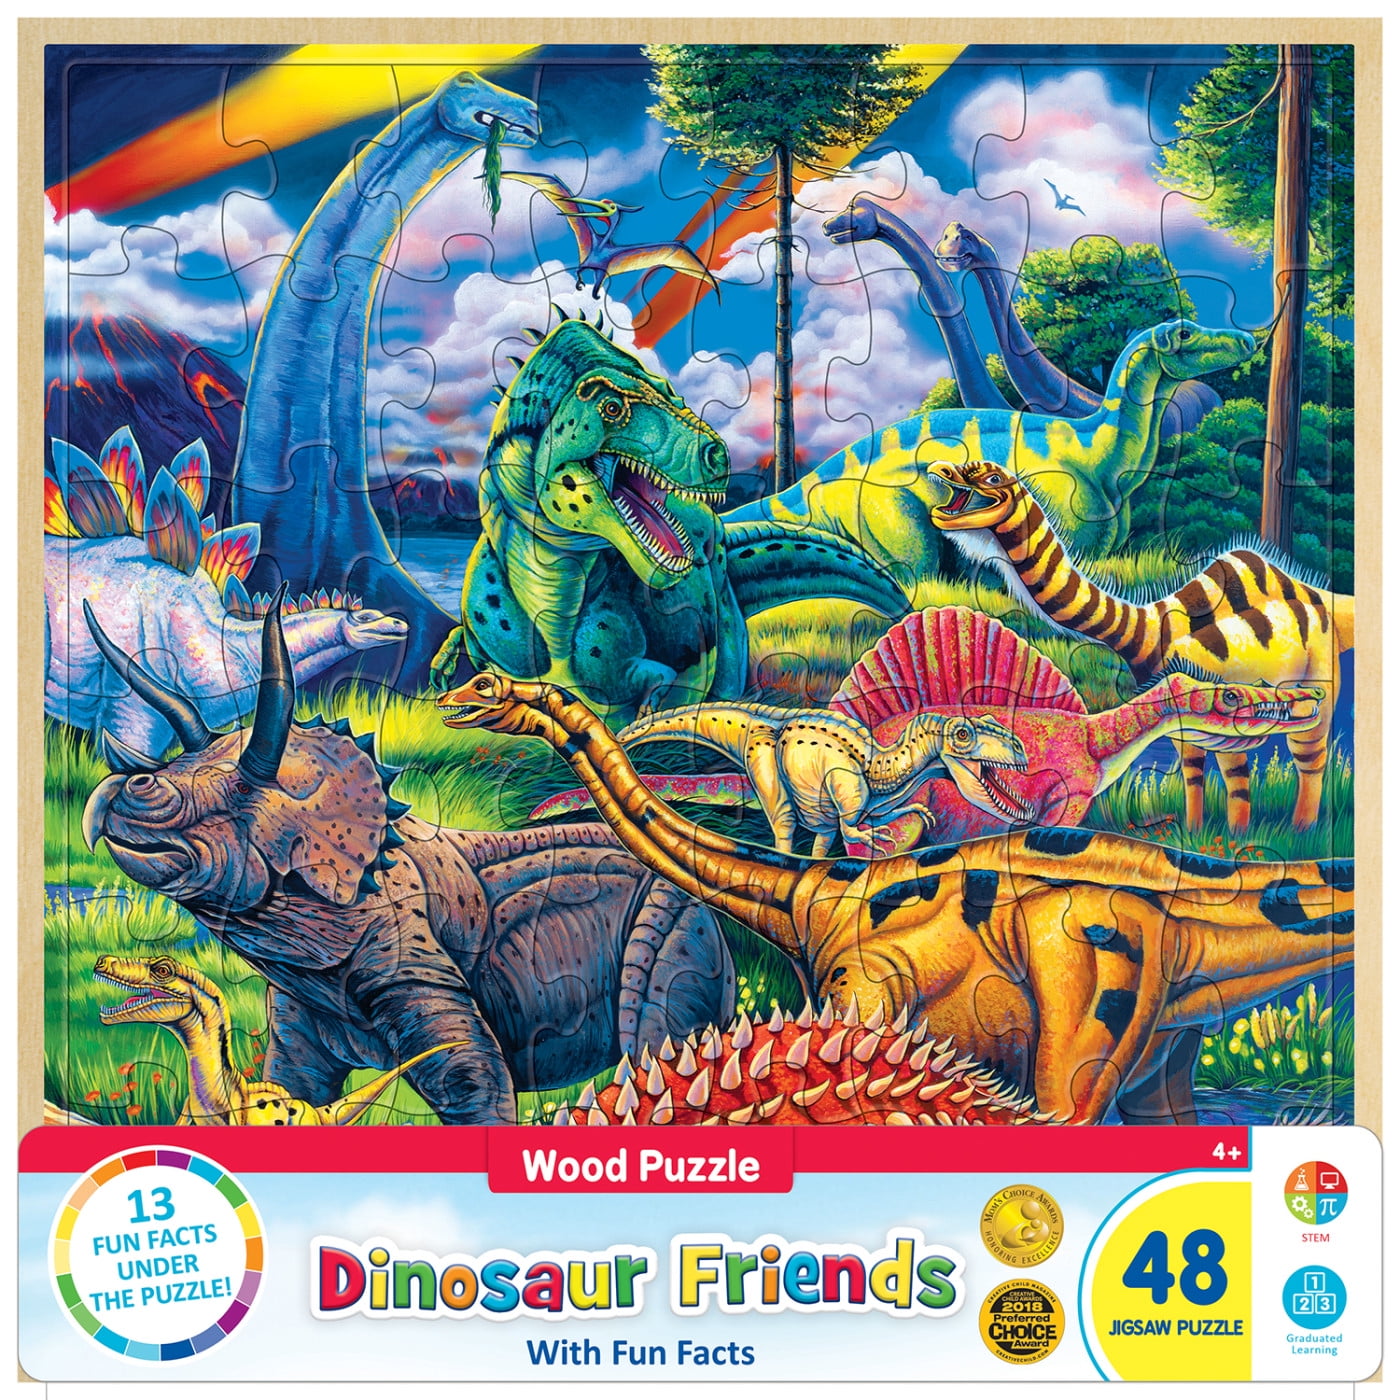 Dinosaurs Jigsaw puzzle 250 pieces any holiday board game for boys